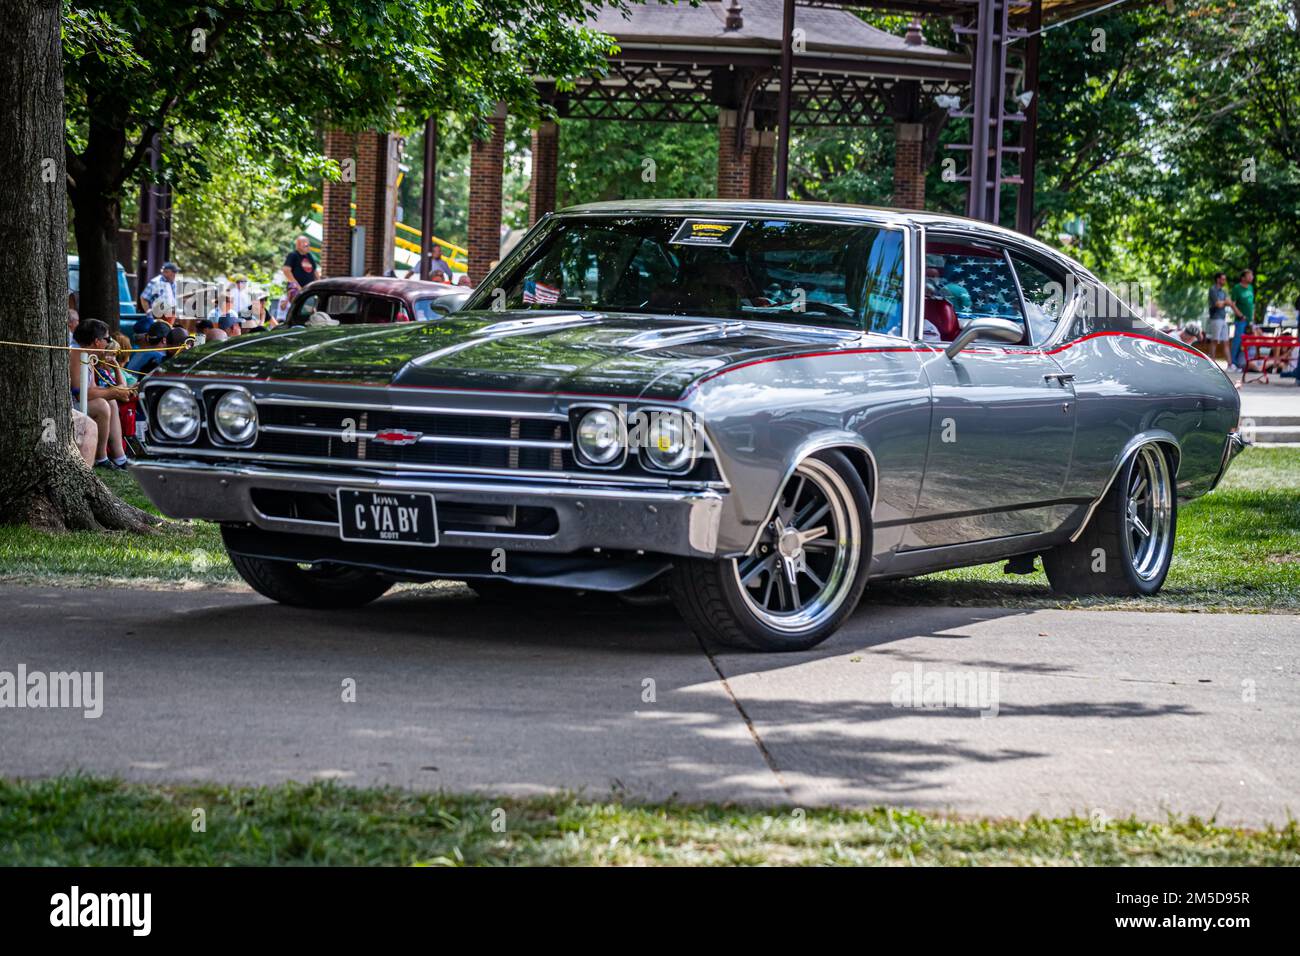 Des Moines, IA - July 03, 2022: Low perspective front corner view of a 1969 Chevrolet Chevelle Hardtop Coupe at a local car show. Stock Photo